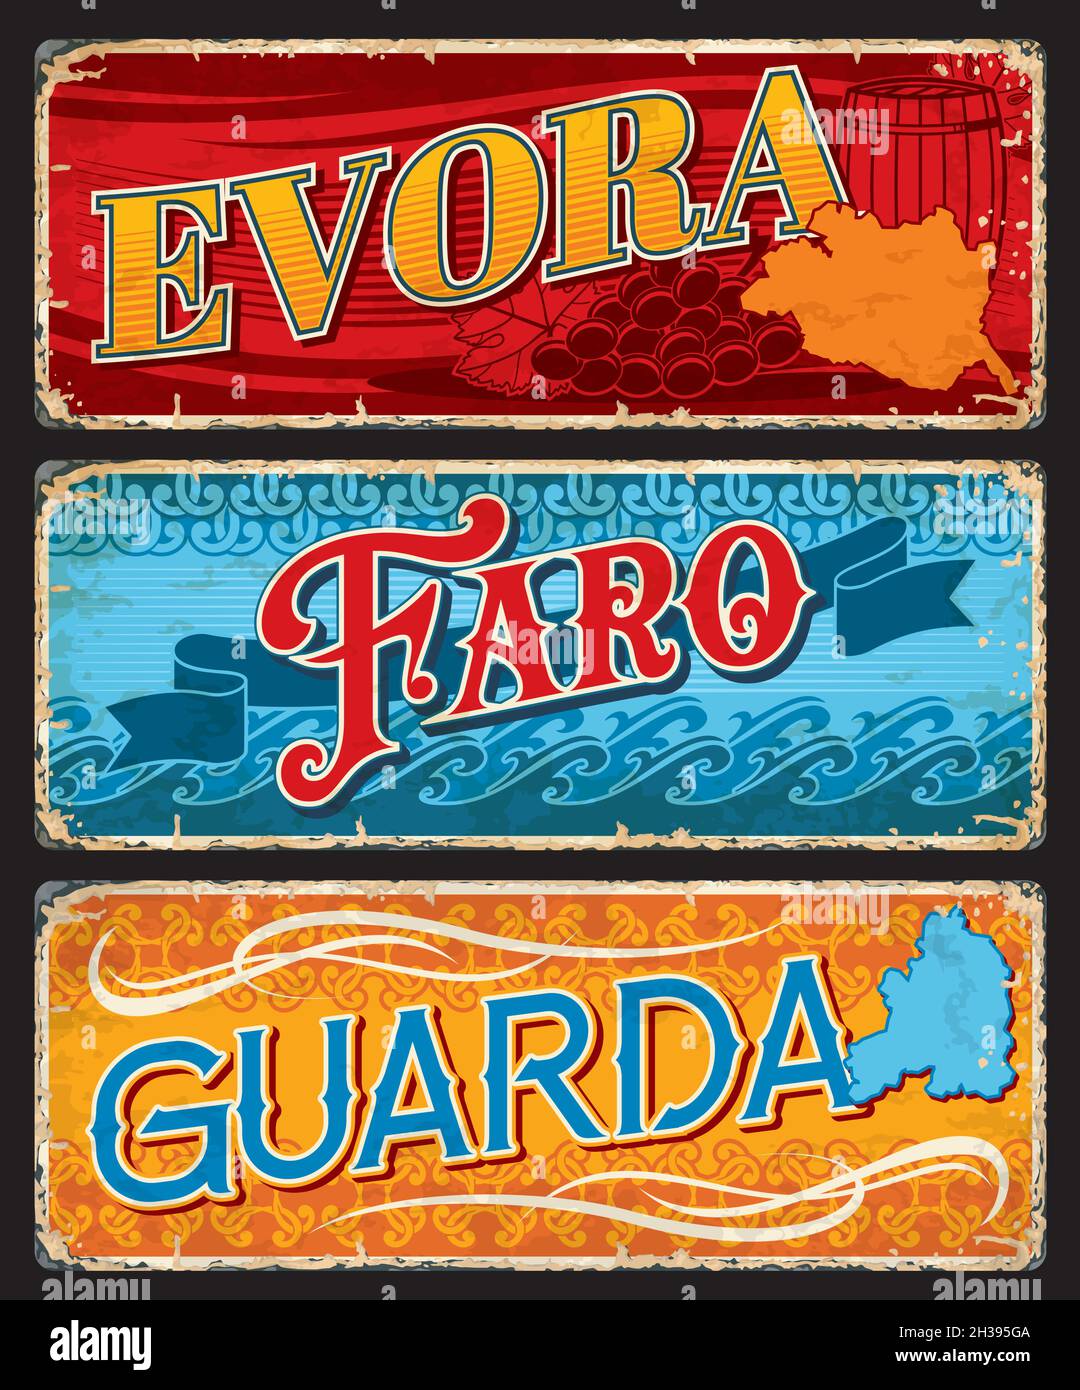 Evora, Faro and Guarda, Portuguese province plates, vector travel tin signs. Portugal cities and provinces luggage tags with welcome taglines or touri Stock Vector